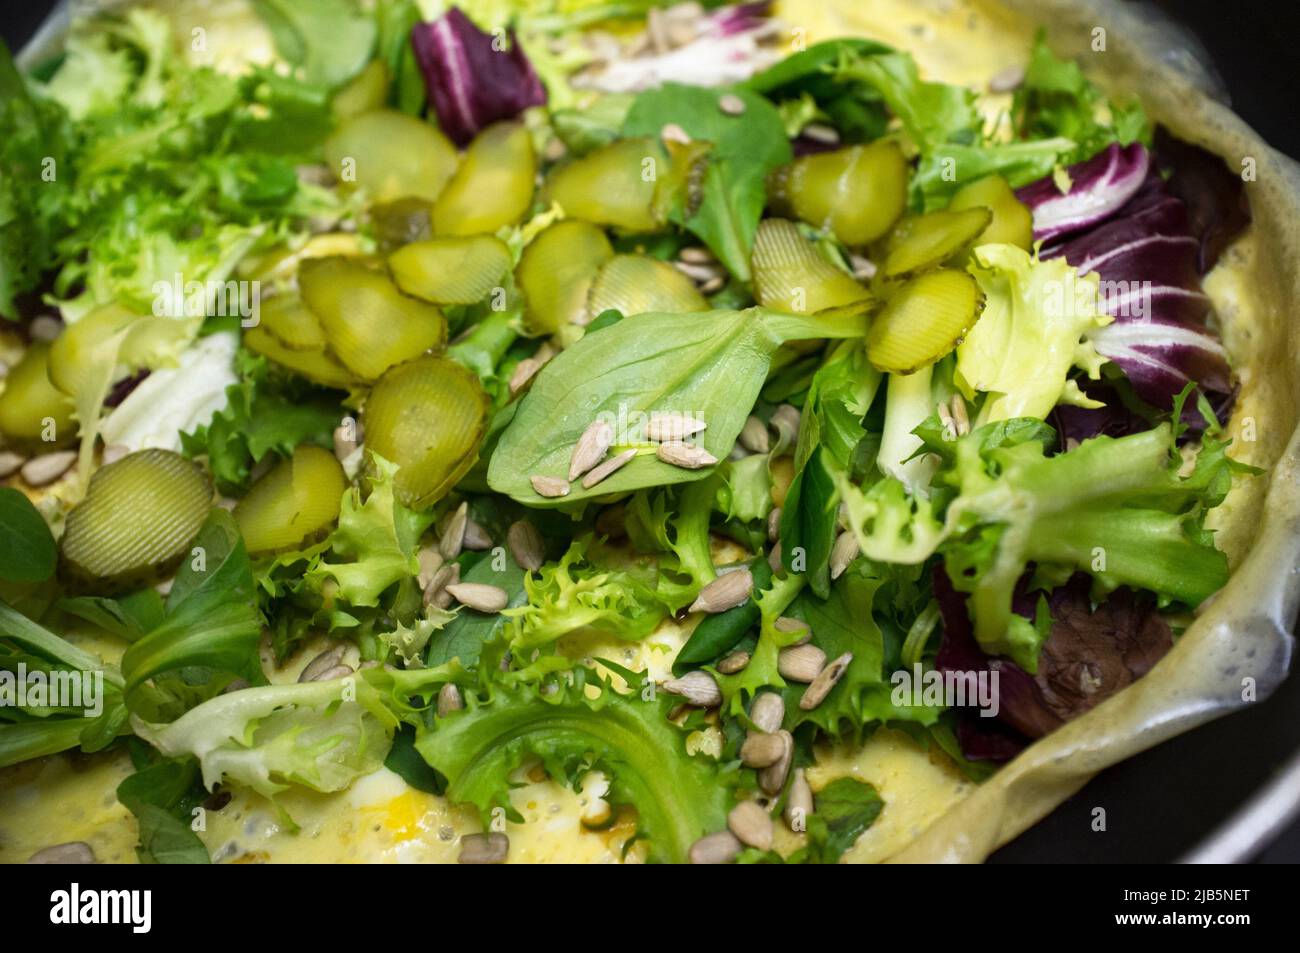 Hot salad over  scrambled egg on pan. Plate with several lettuces, gherkins and sunflowers seeds. Stock Photo